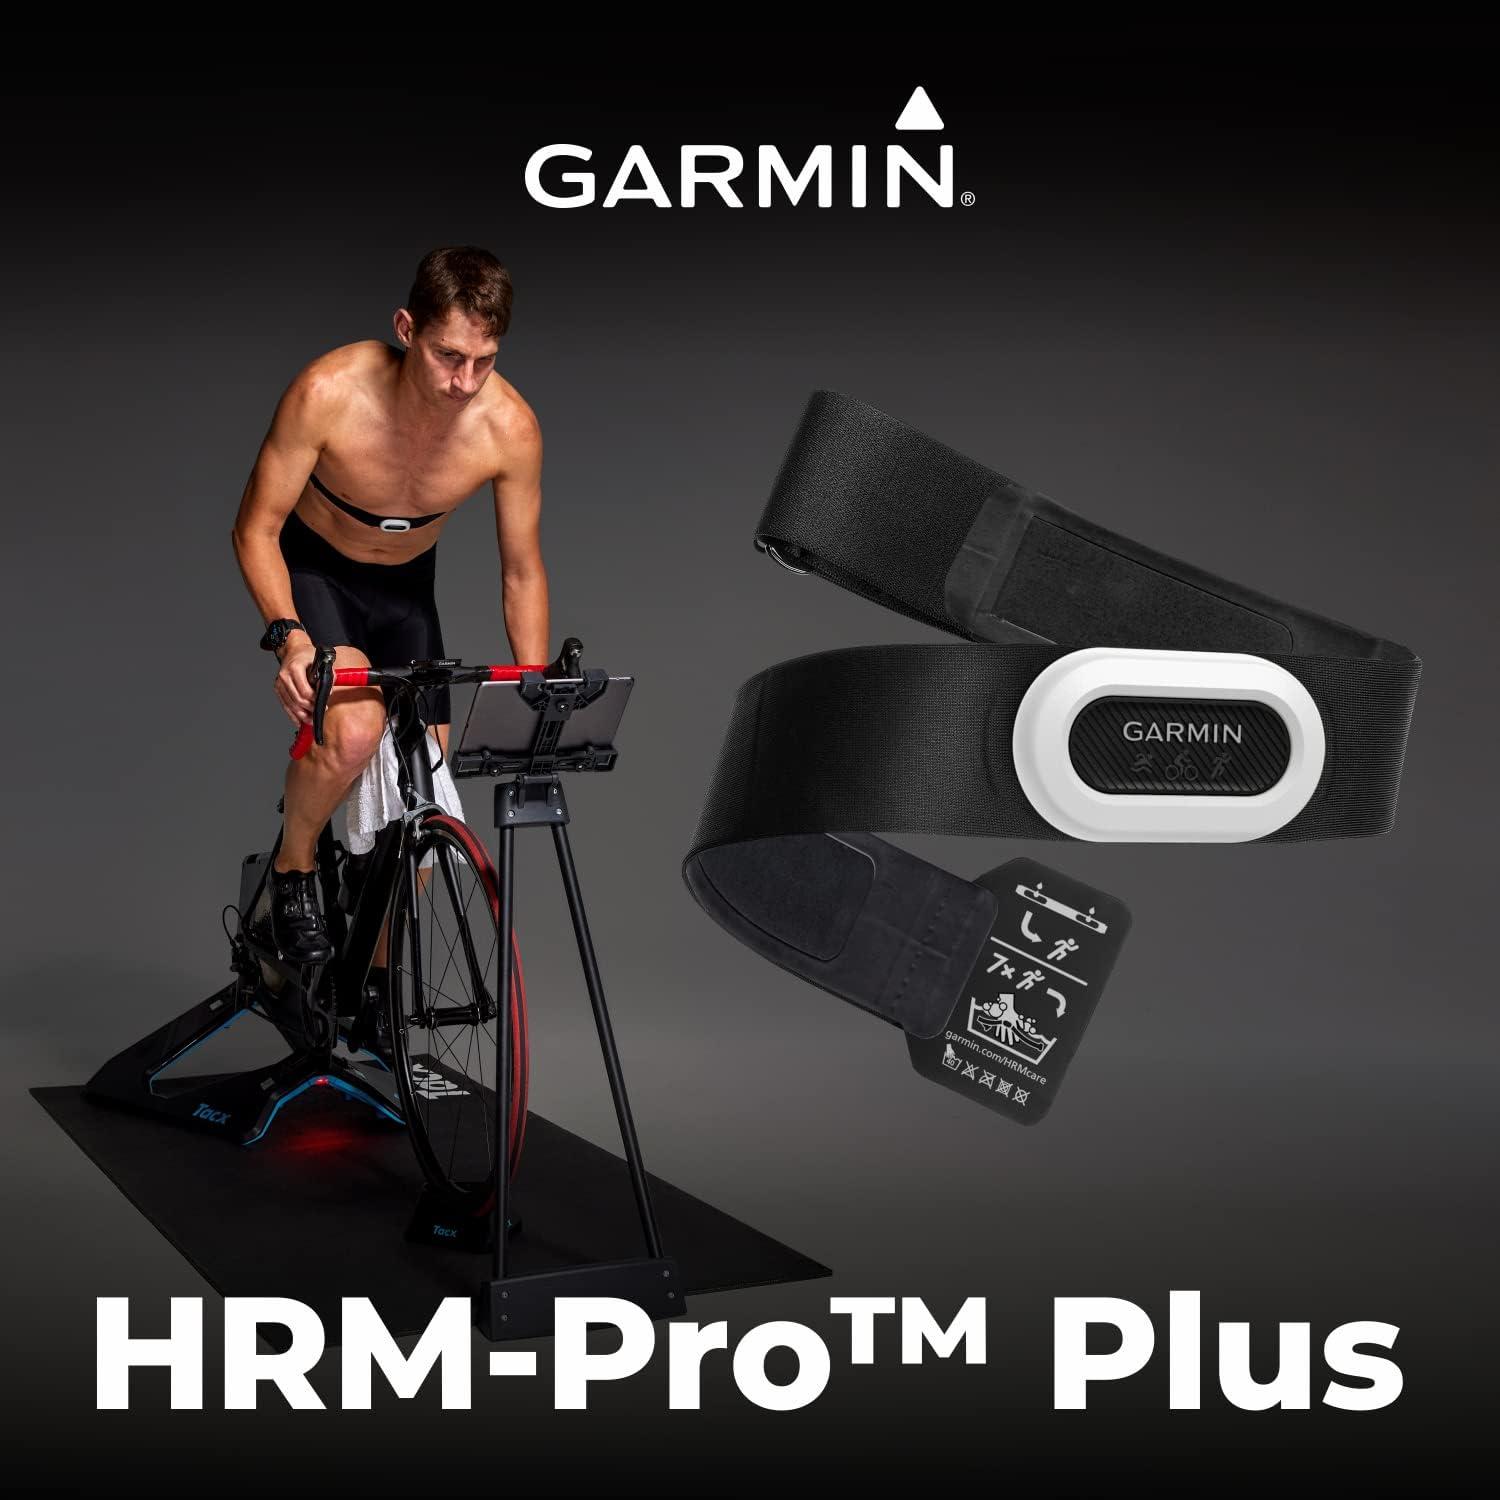 HRM PRO PLUS Issue - keeps disconnecting, any advise how to deal with that?  : r/Garmin